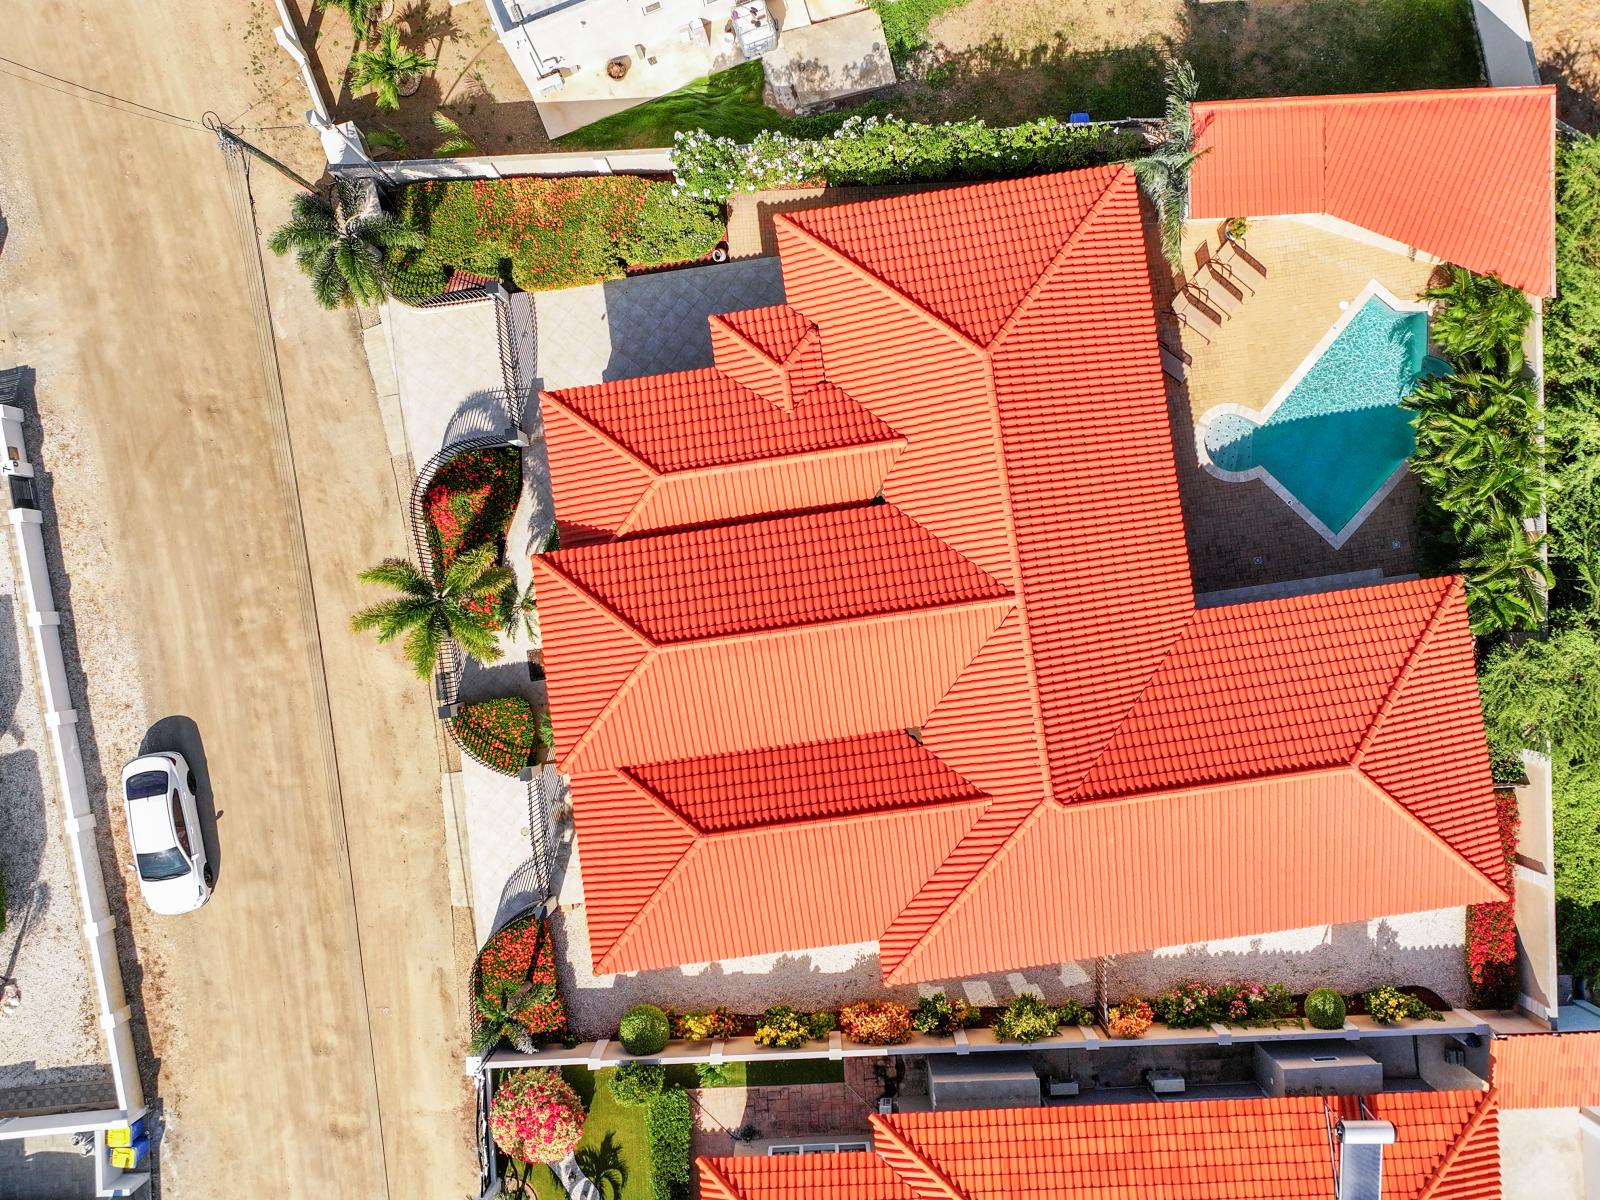 Aerial view of the villa captured by drone.